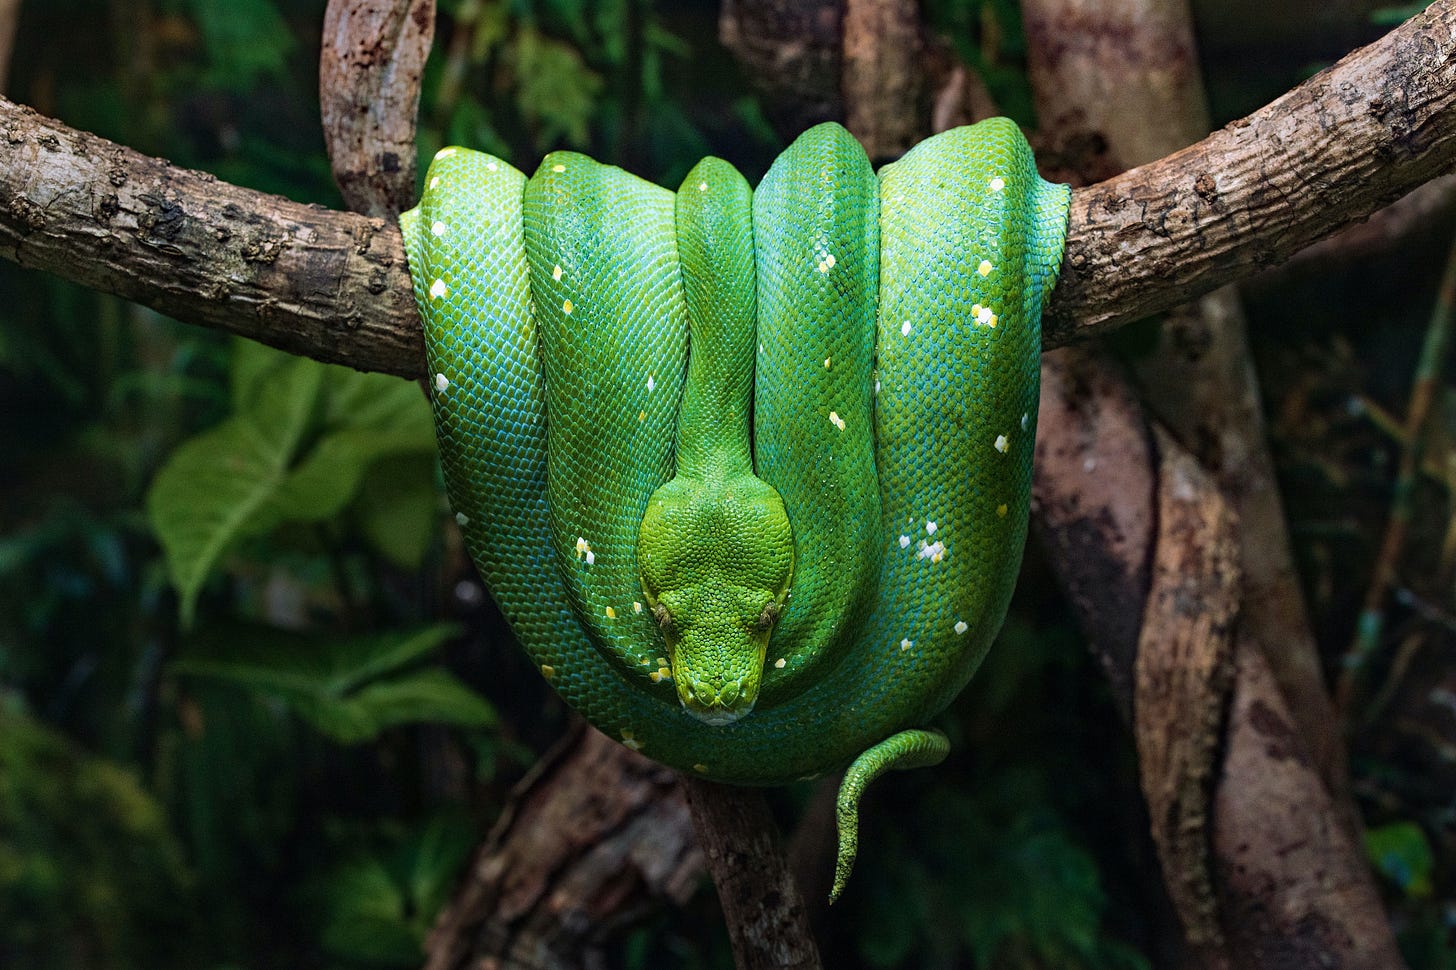 A bright green snake coiled over a tree branch